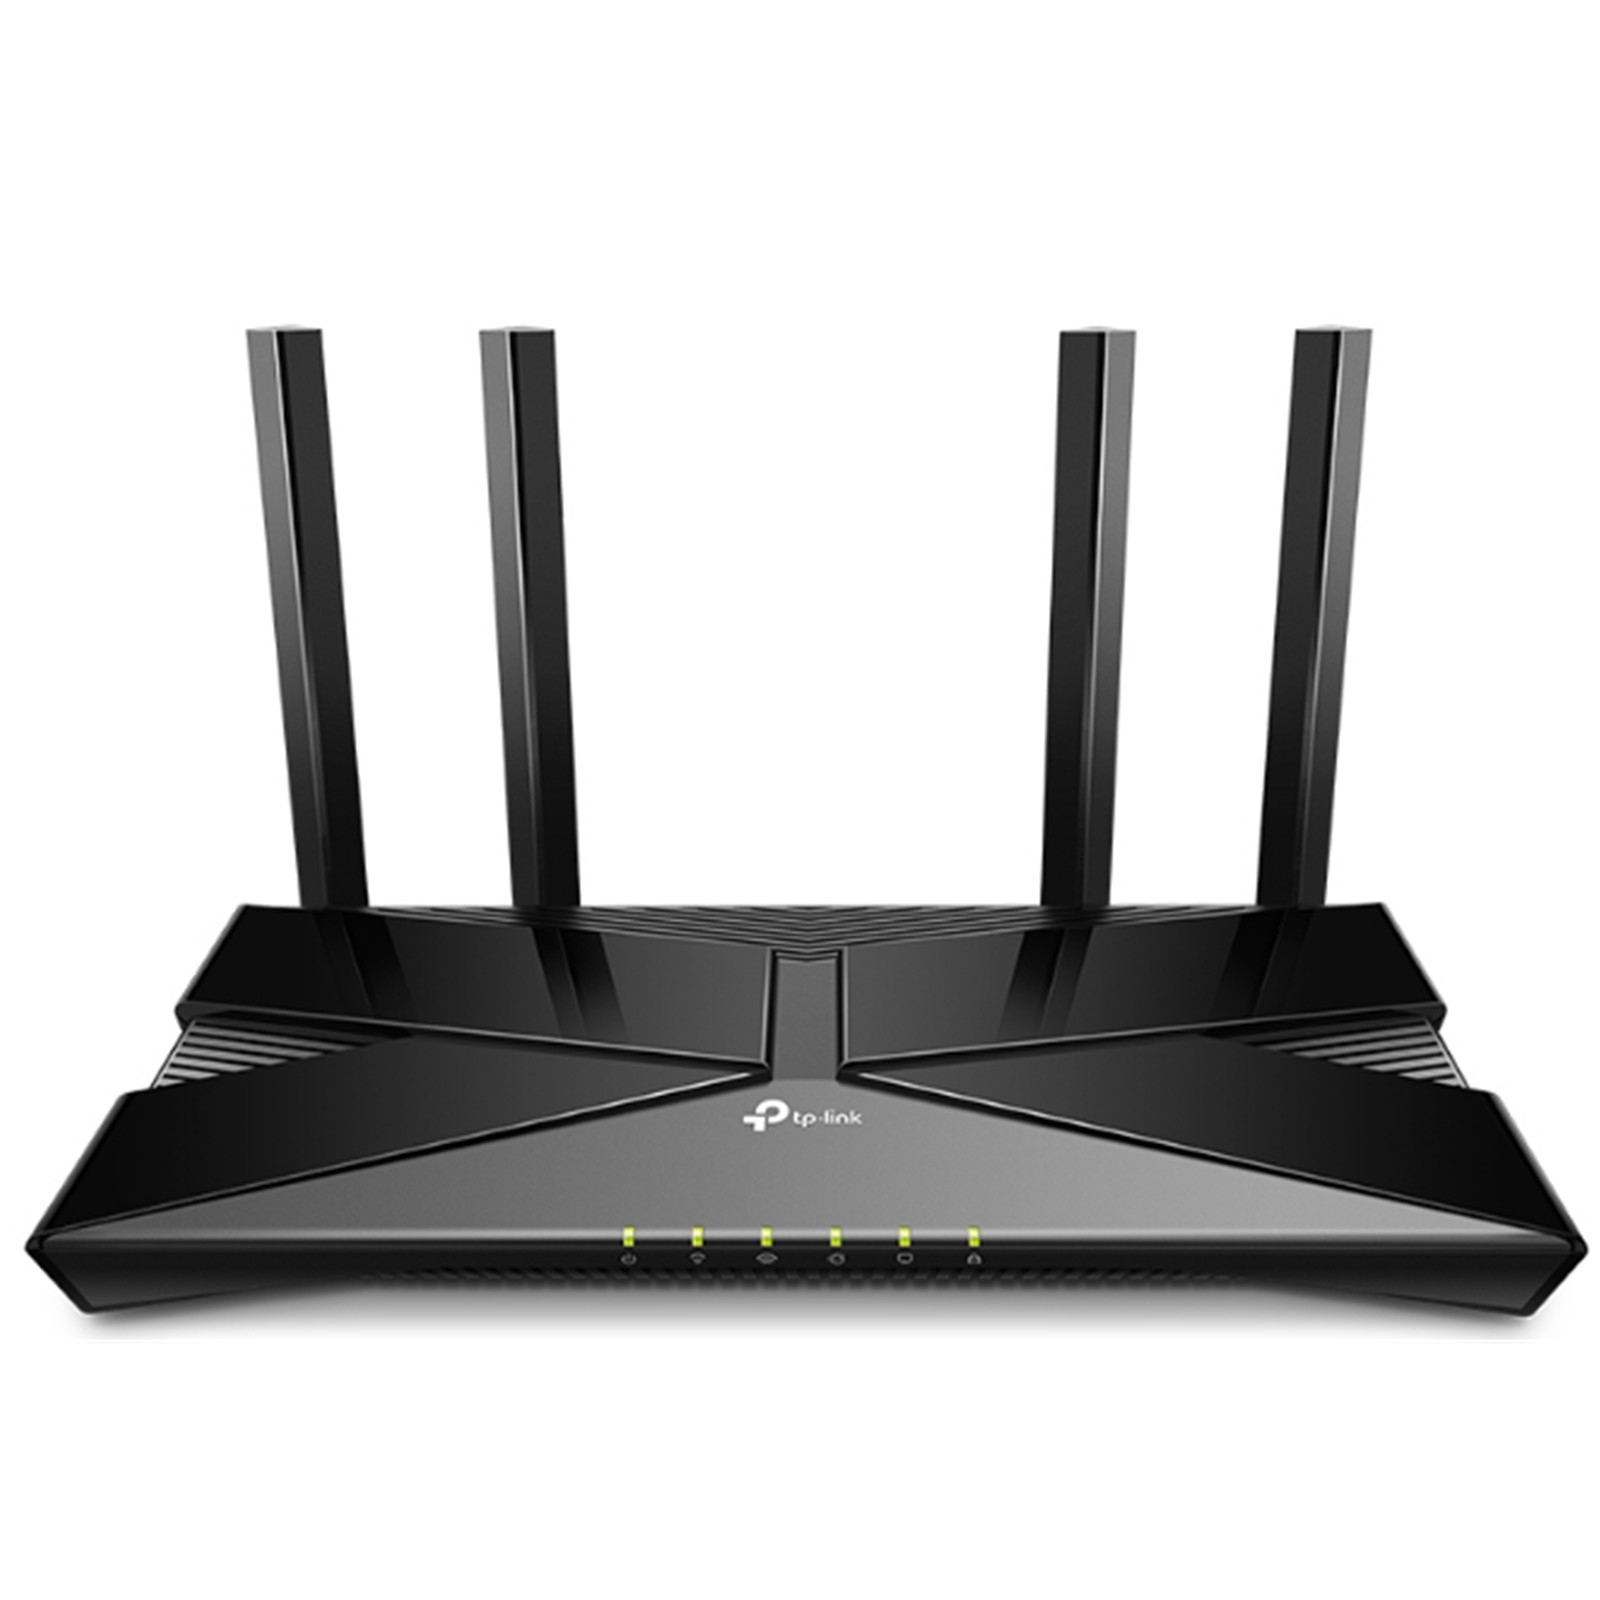 What to look for in a new router